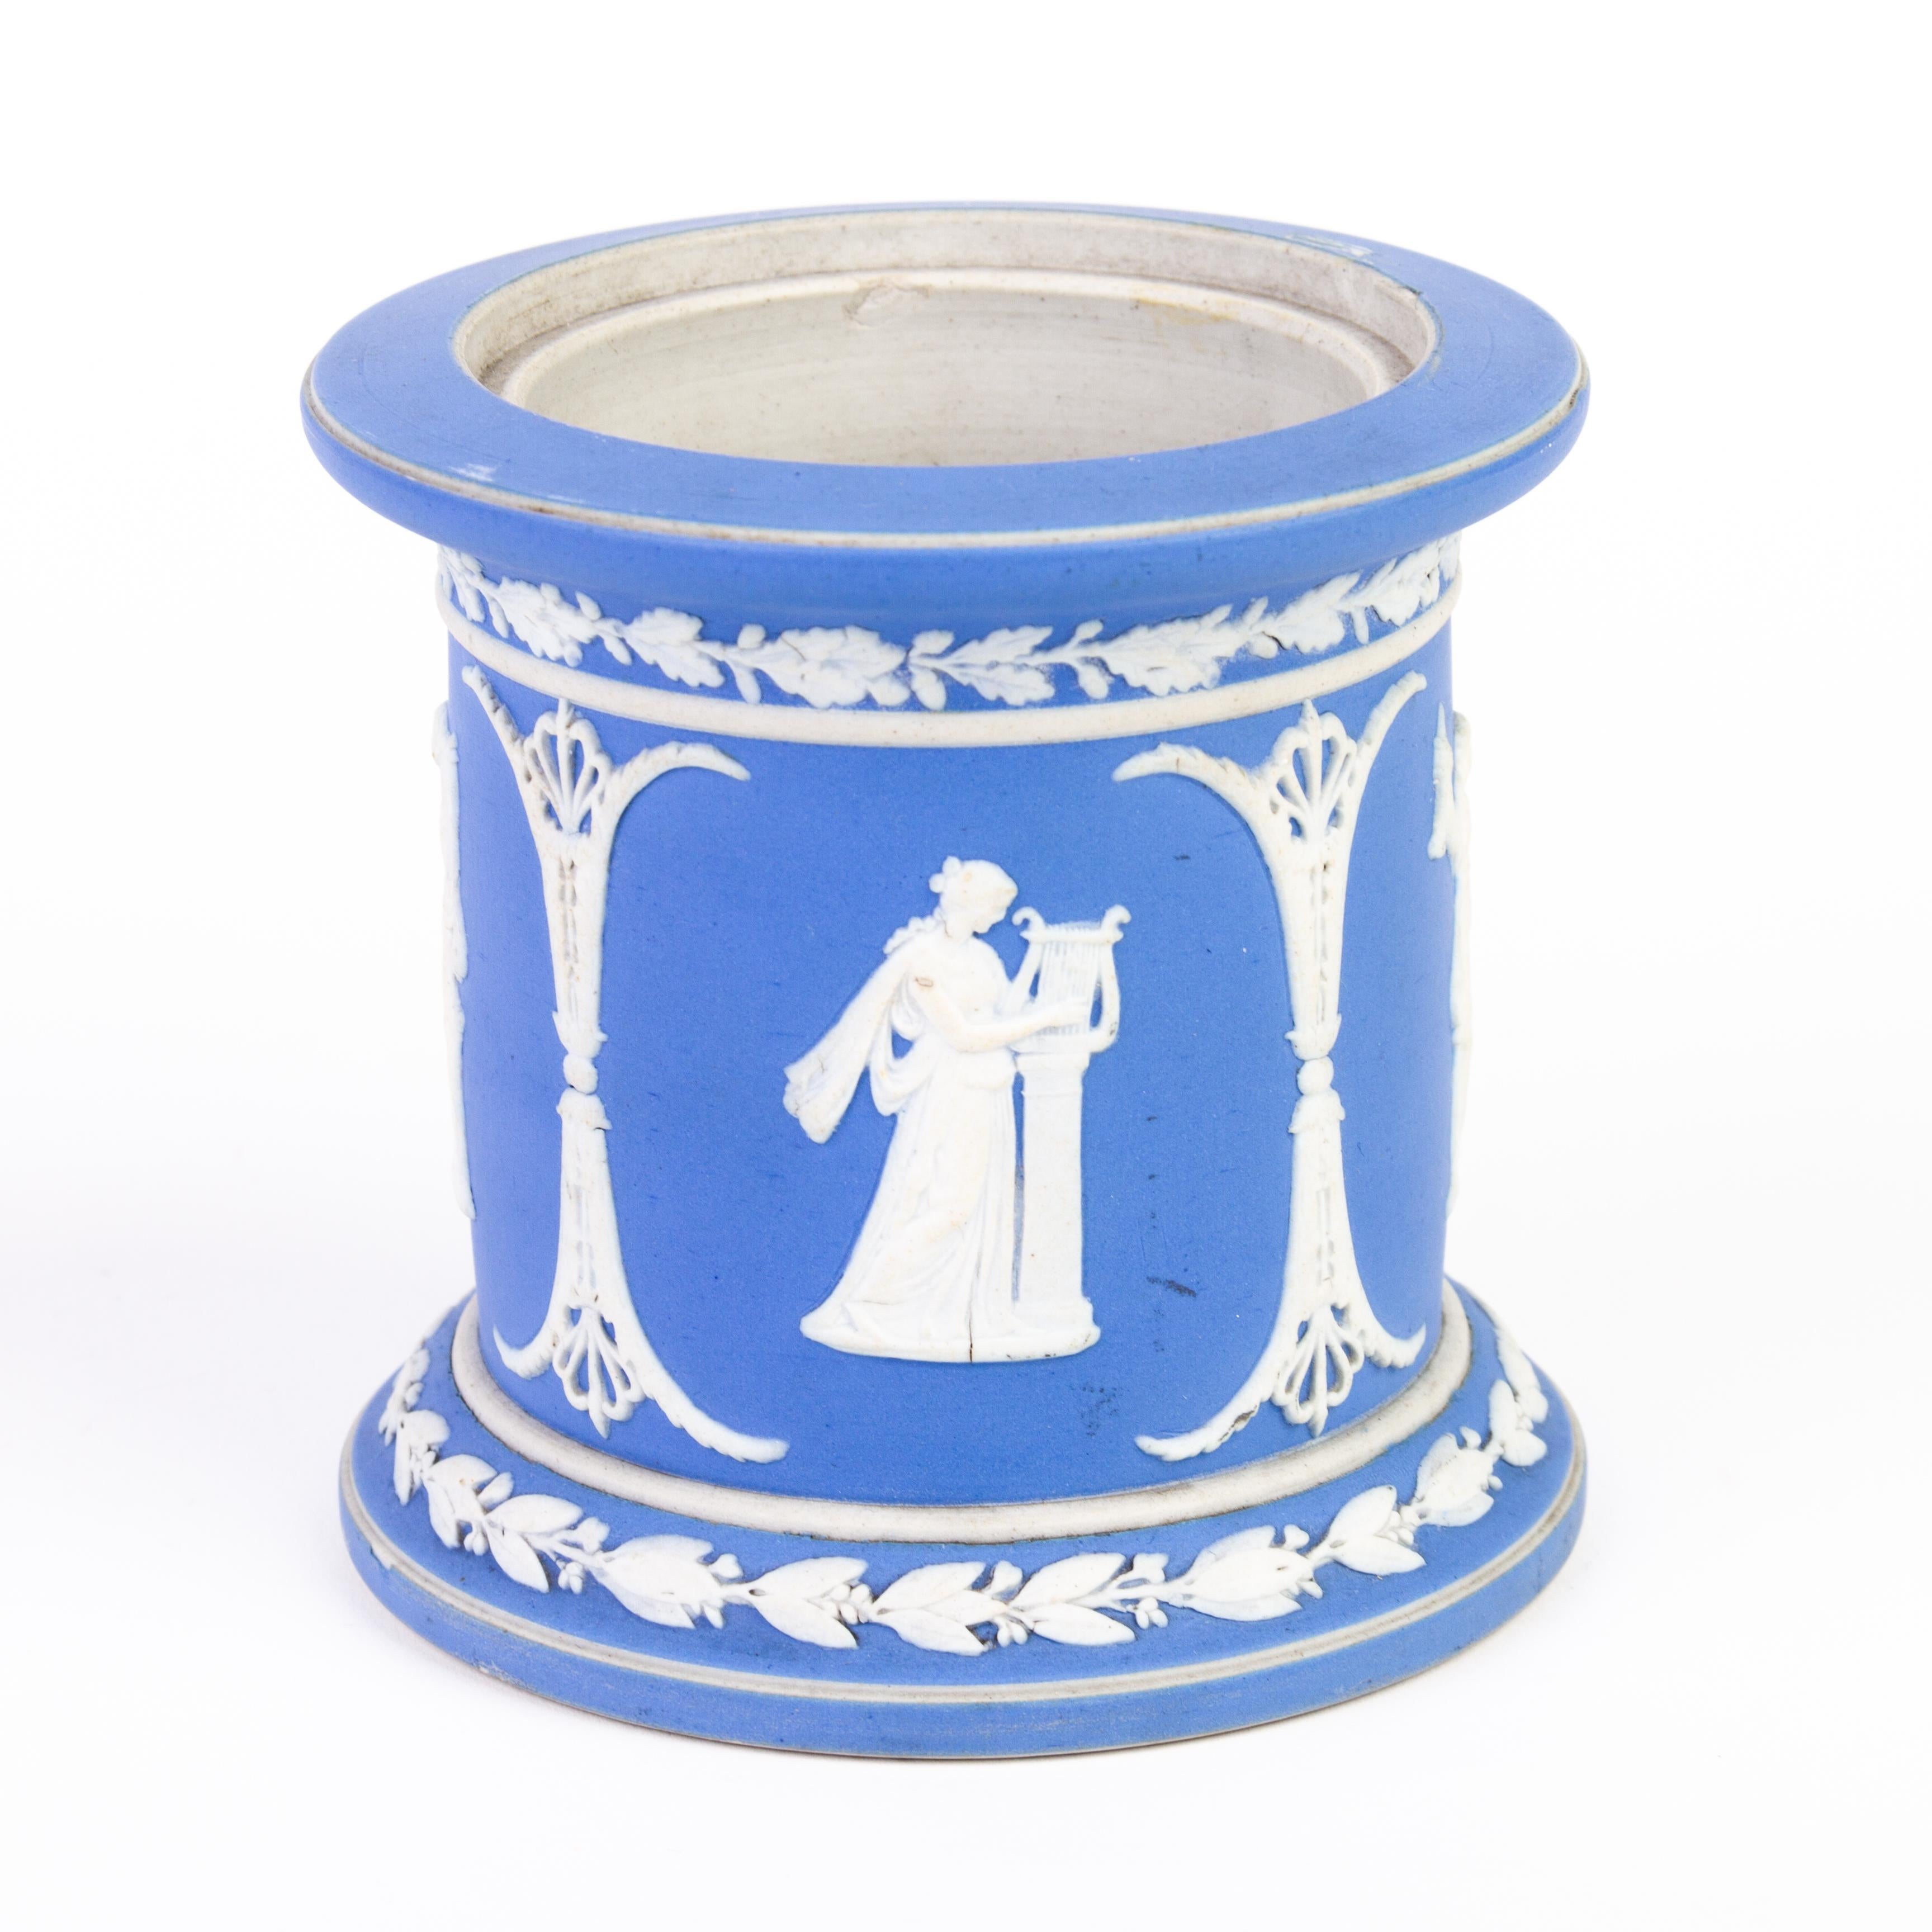 From a private collection.
Free international shipping.
Wedgwood Blue Jasperware Neoclassical Vase